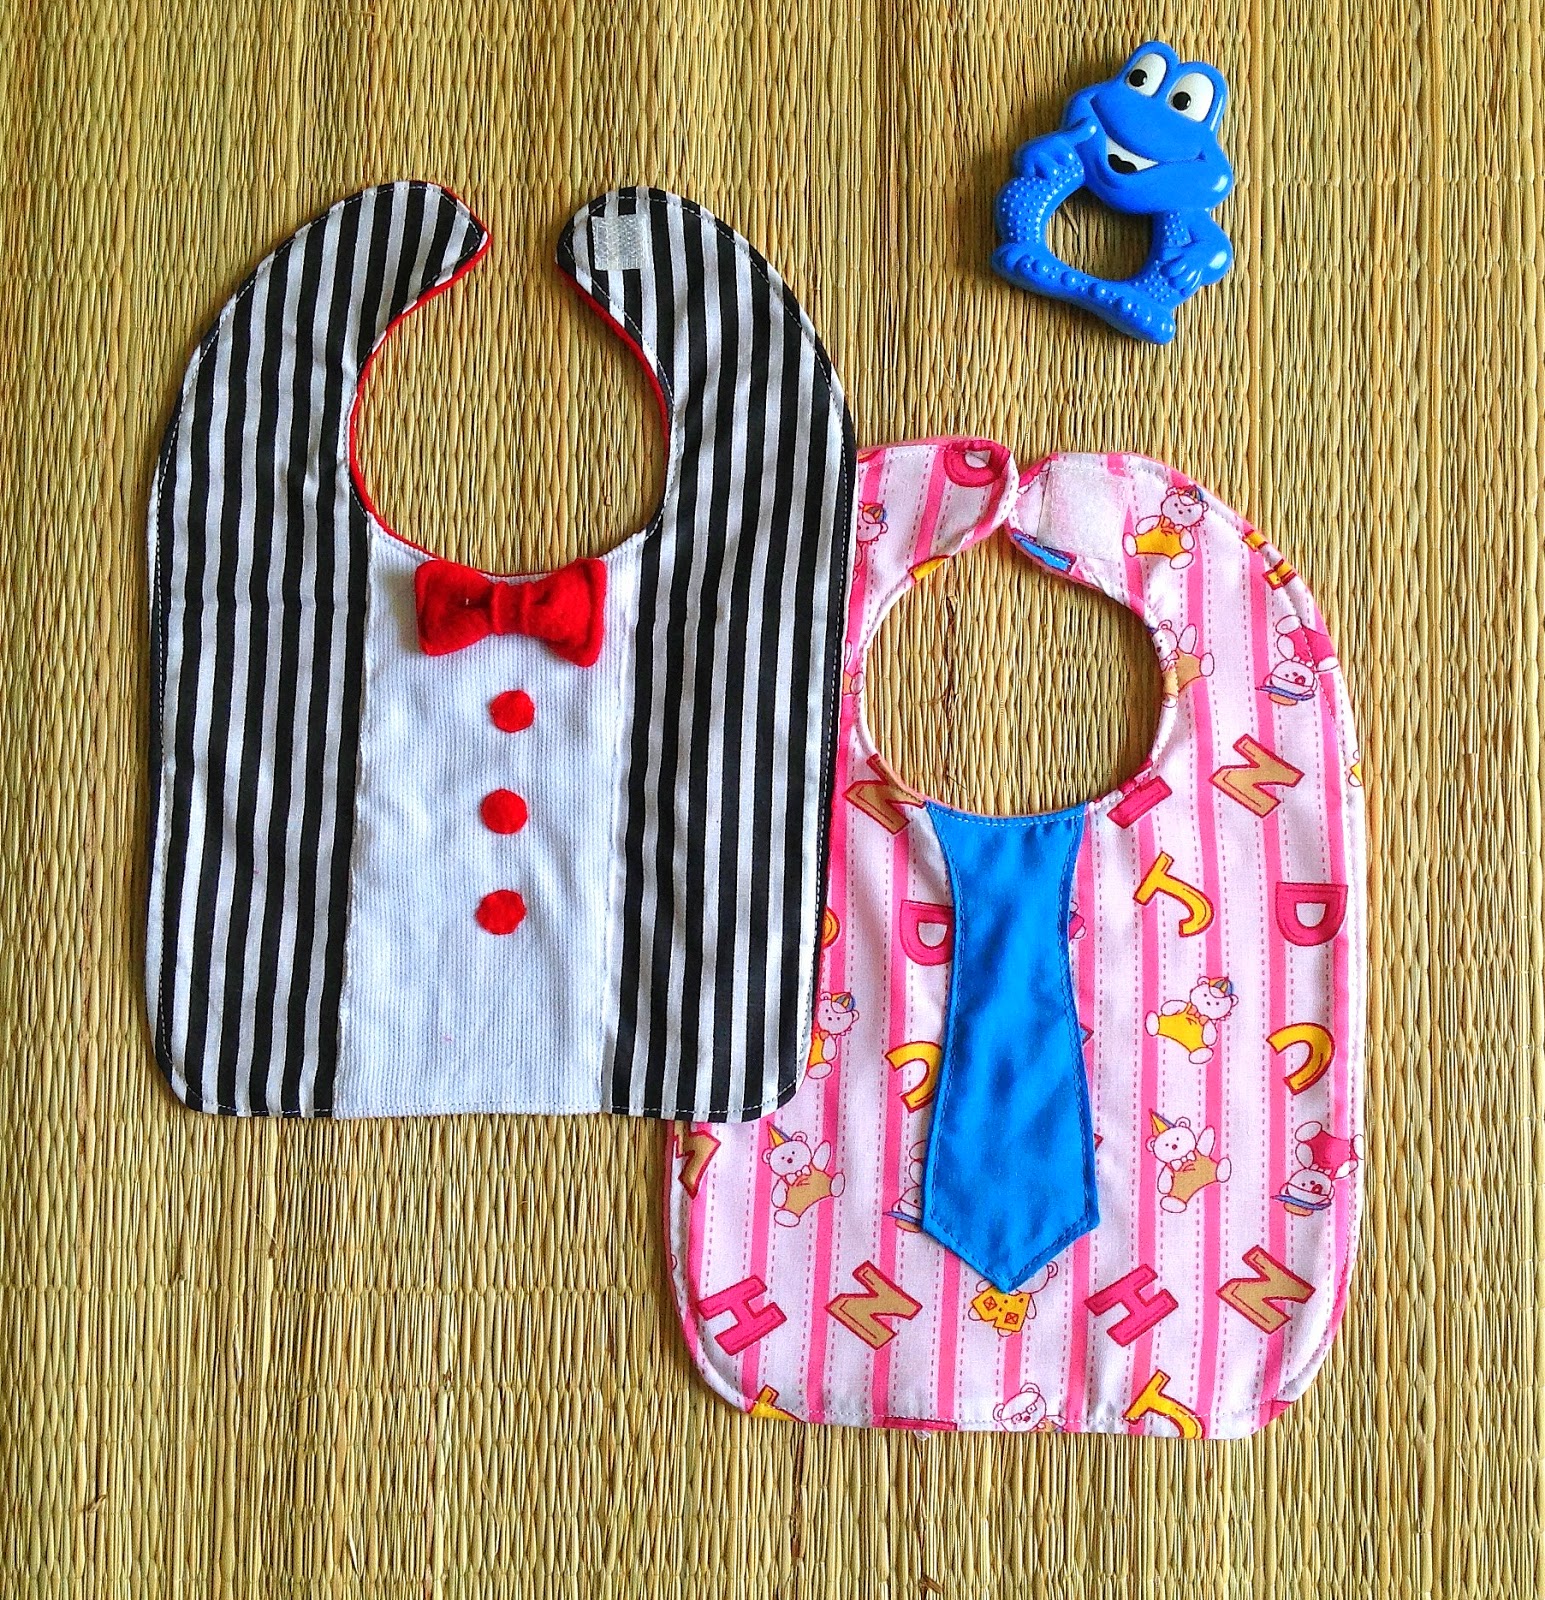 What are some popular sewing patterns for baby bibs?